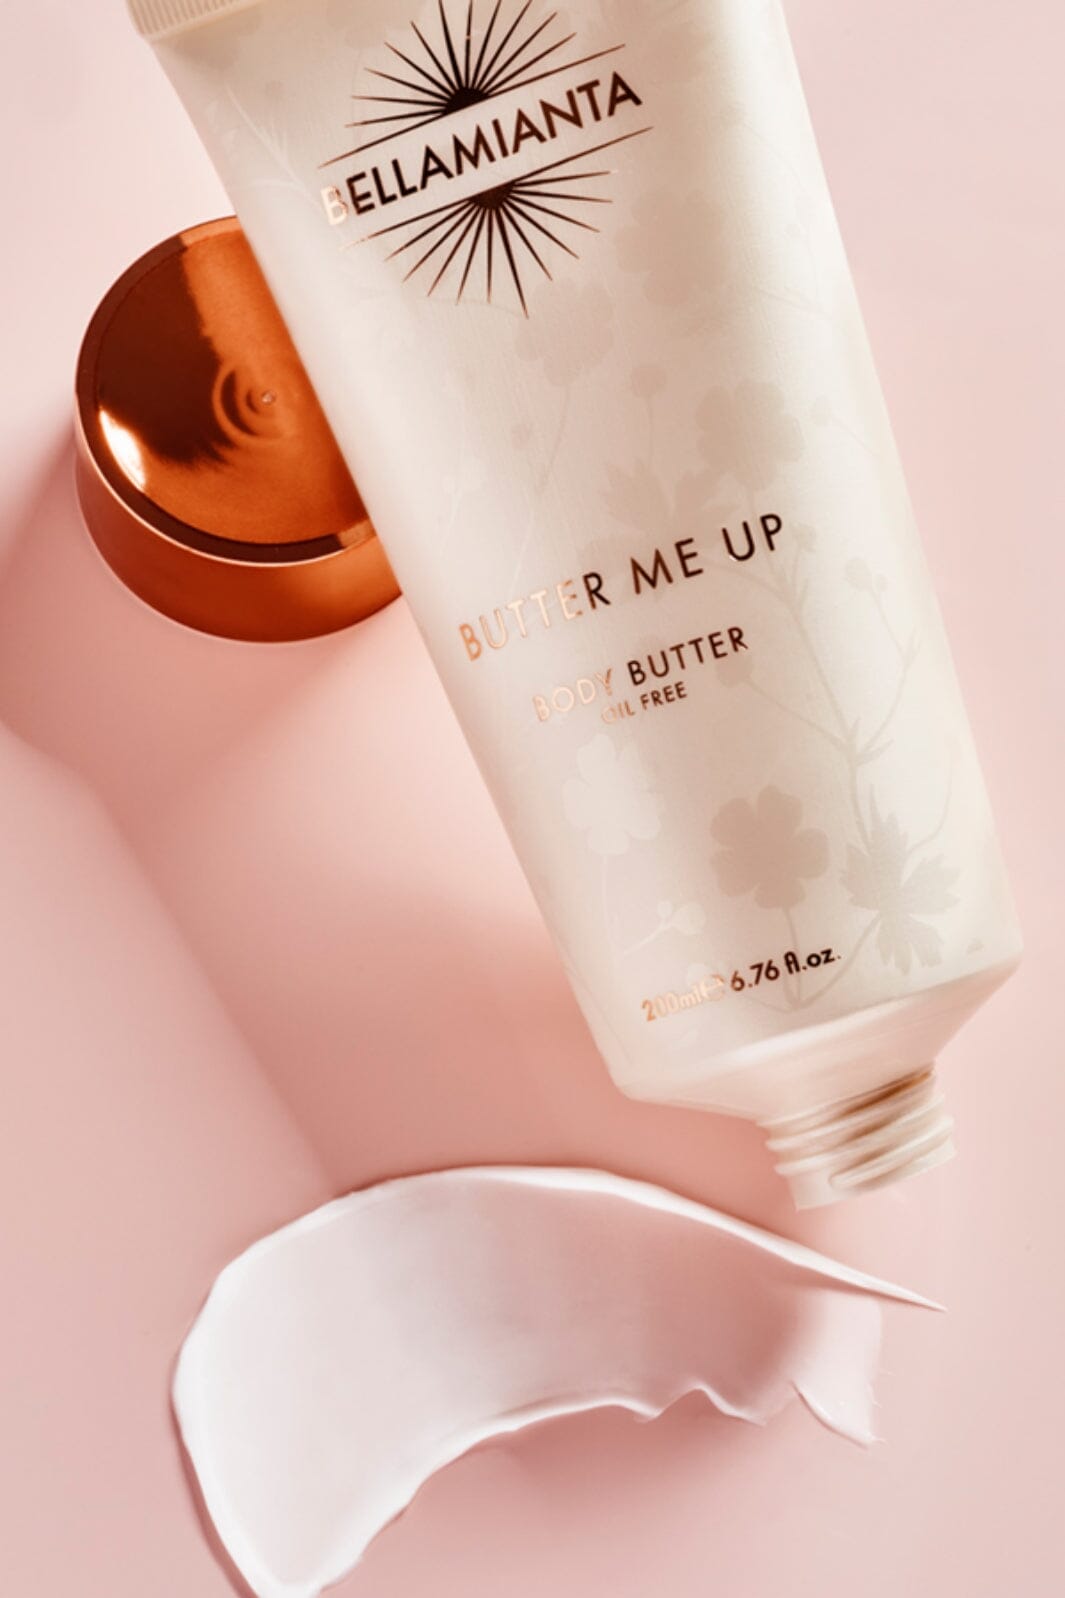 Bellamianta - Butter Me Up Body Butter Body lotion 